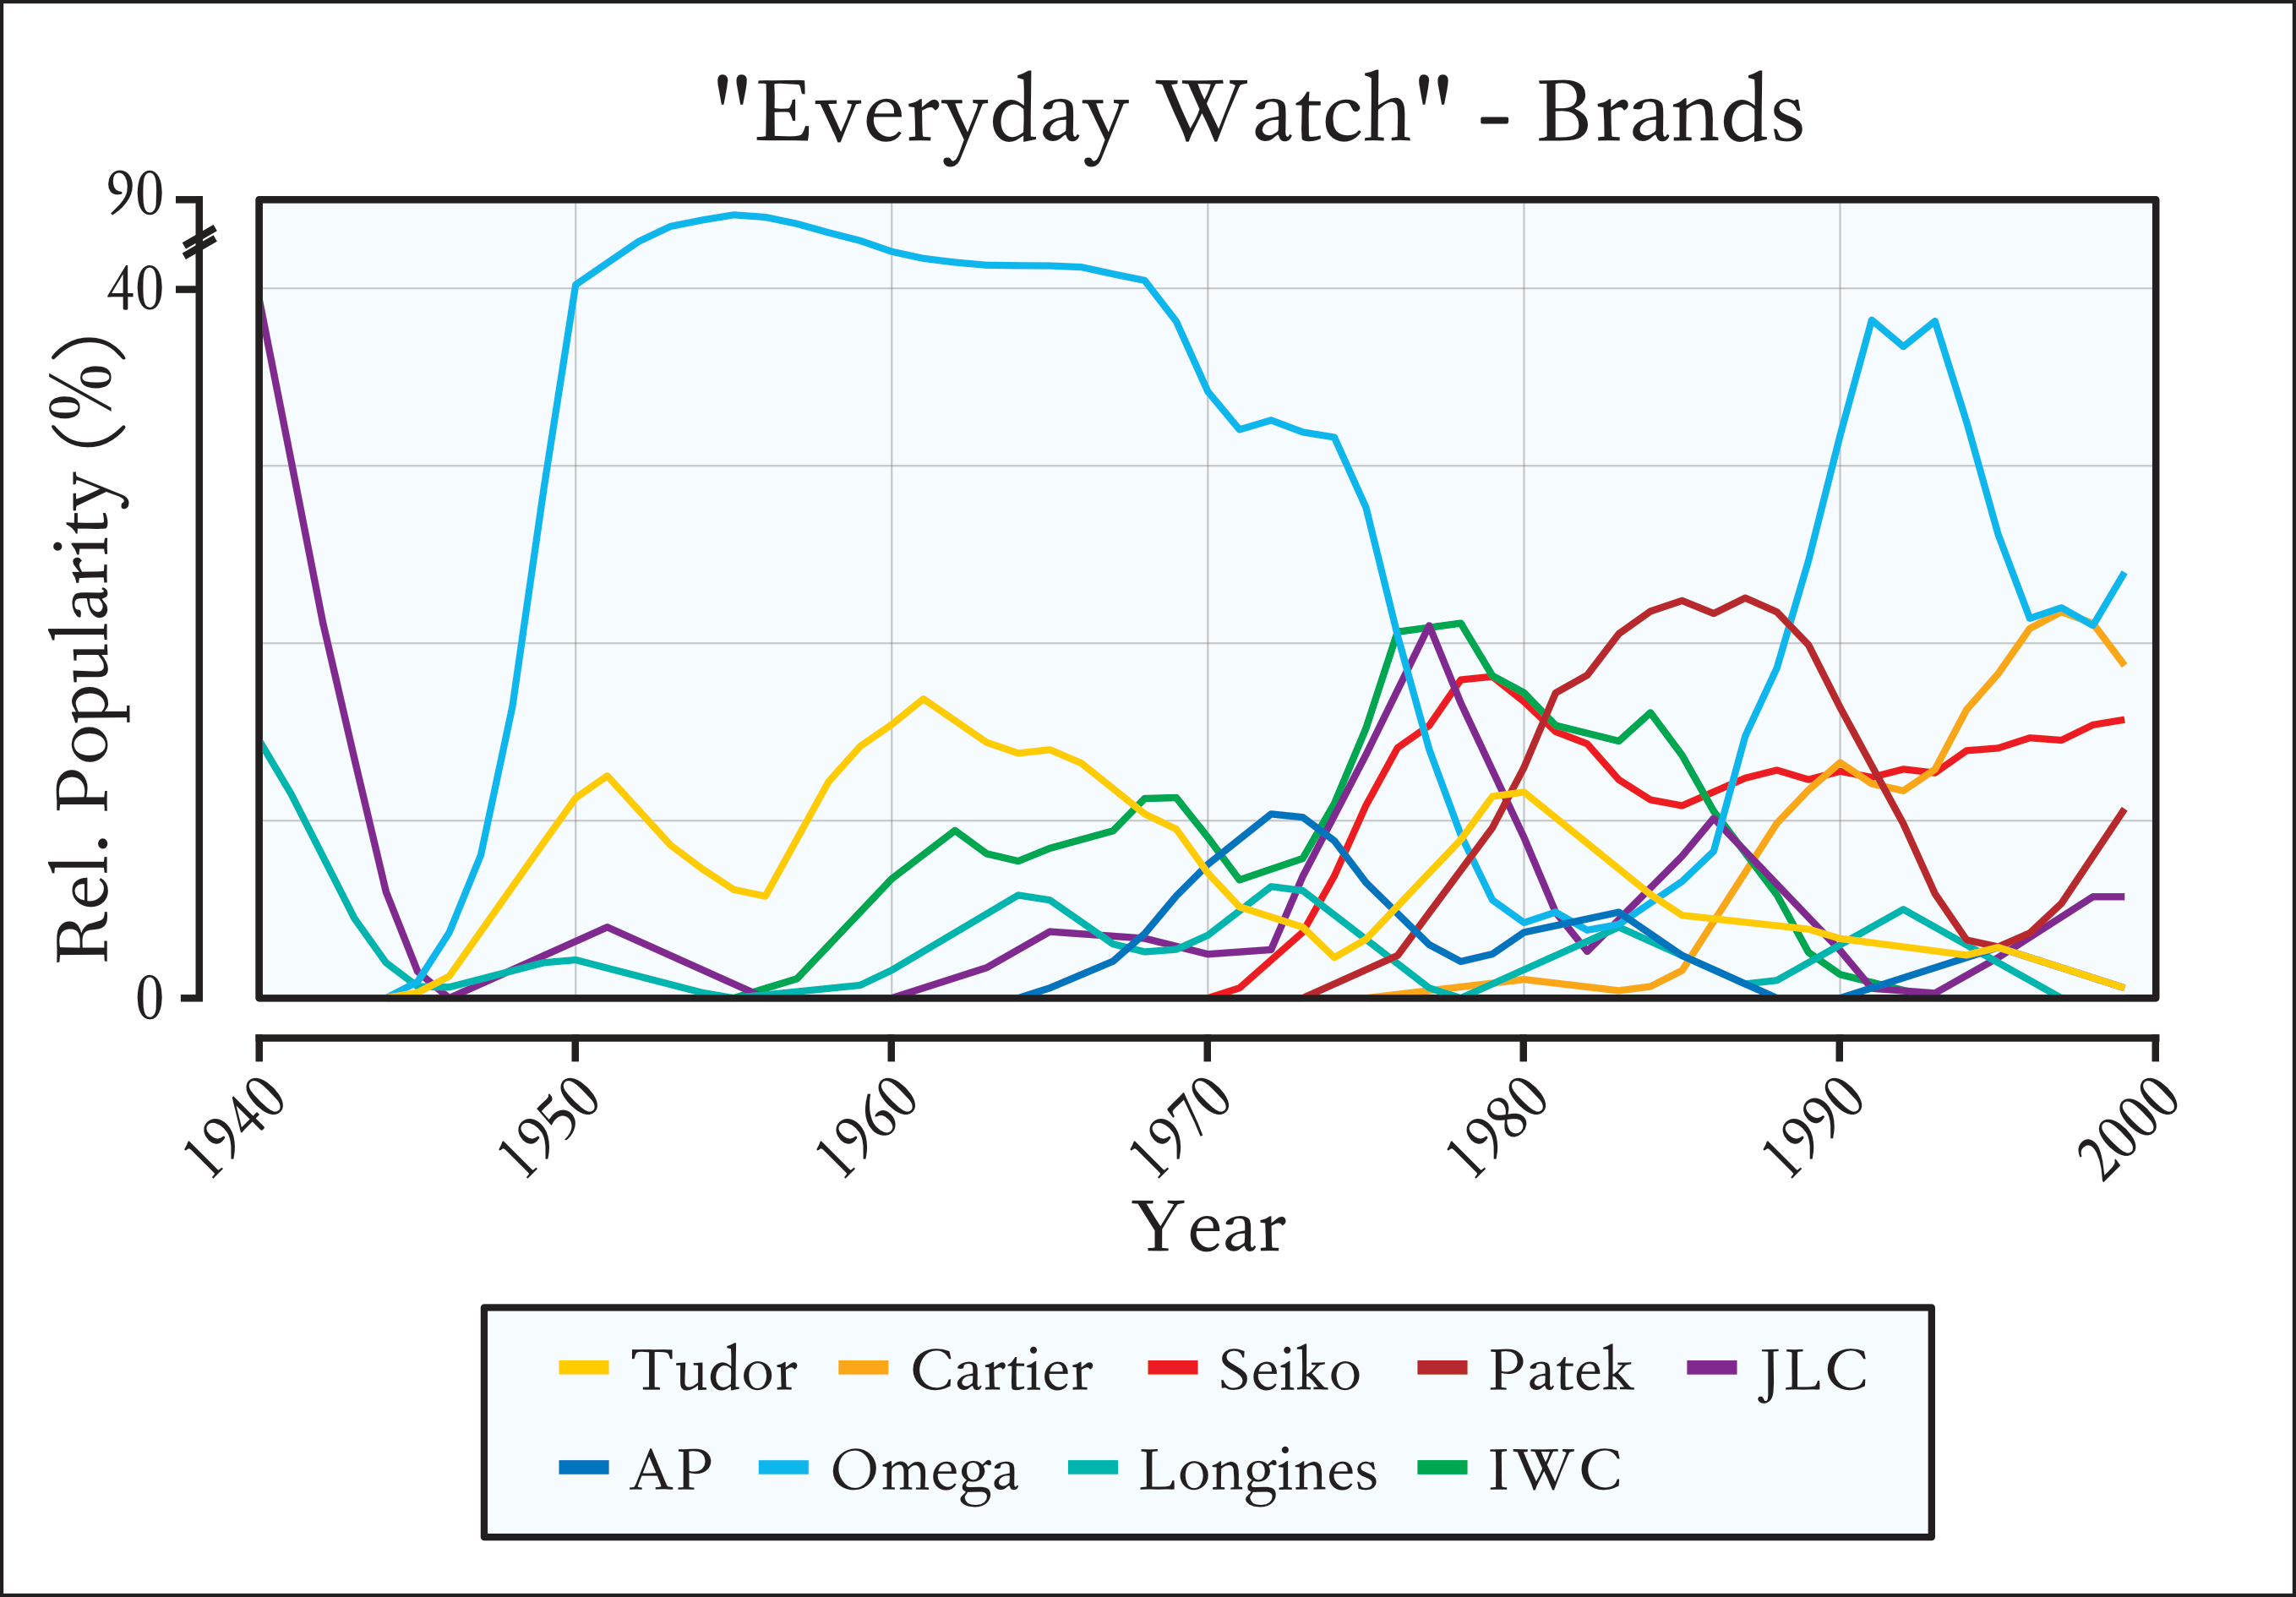 Distribution of Brands producing dress casual watches from 1940-2000